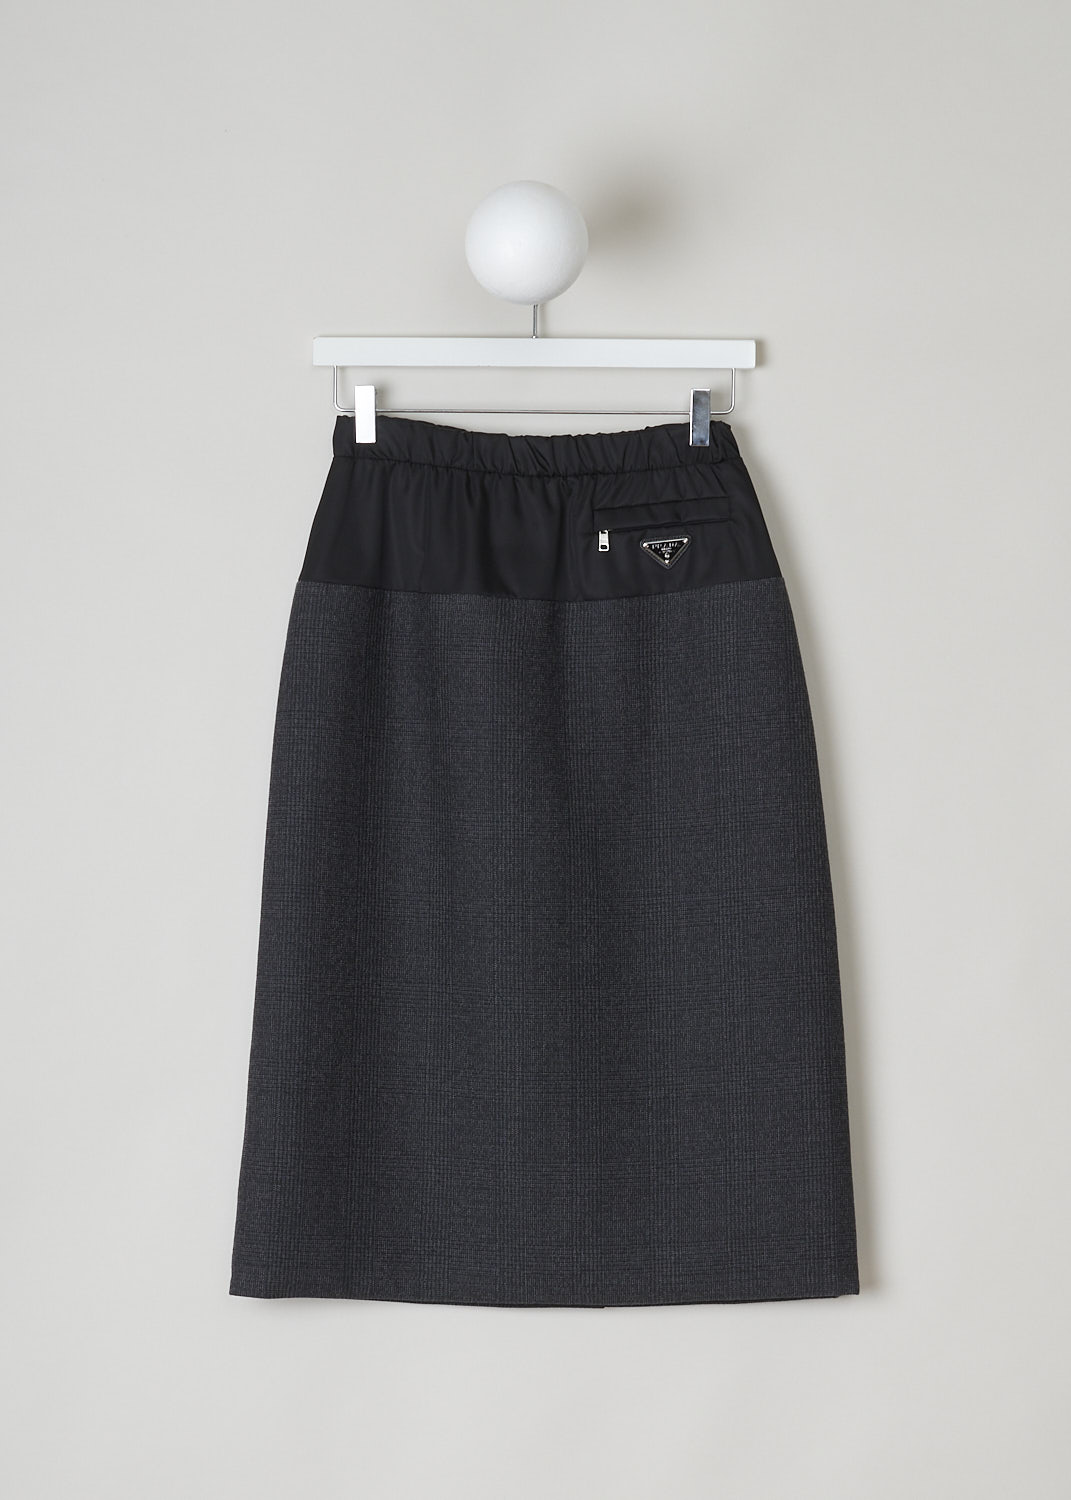 PRADA, MULTI FABRIC PENCIL SKIRT, P198S_1Y34_F0806_GALLES_RE_NYLON, Black, Grey, Print, Front, This multi fabric pencil skirt has a black upper trim and a heather grey checkered lower part. The skirt has an elasticated waistband with drawstrings on the inside to cinch in the waist. A concealed side zip functions as an additional closure option. A zipped welt pocket can be found on the front with below, the brand's silver and black triangle logo plaque. In the back, the skirt has a centre slit. The skirt has a straight hemline.
